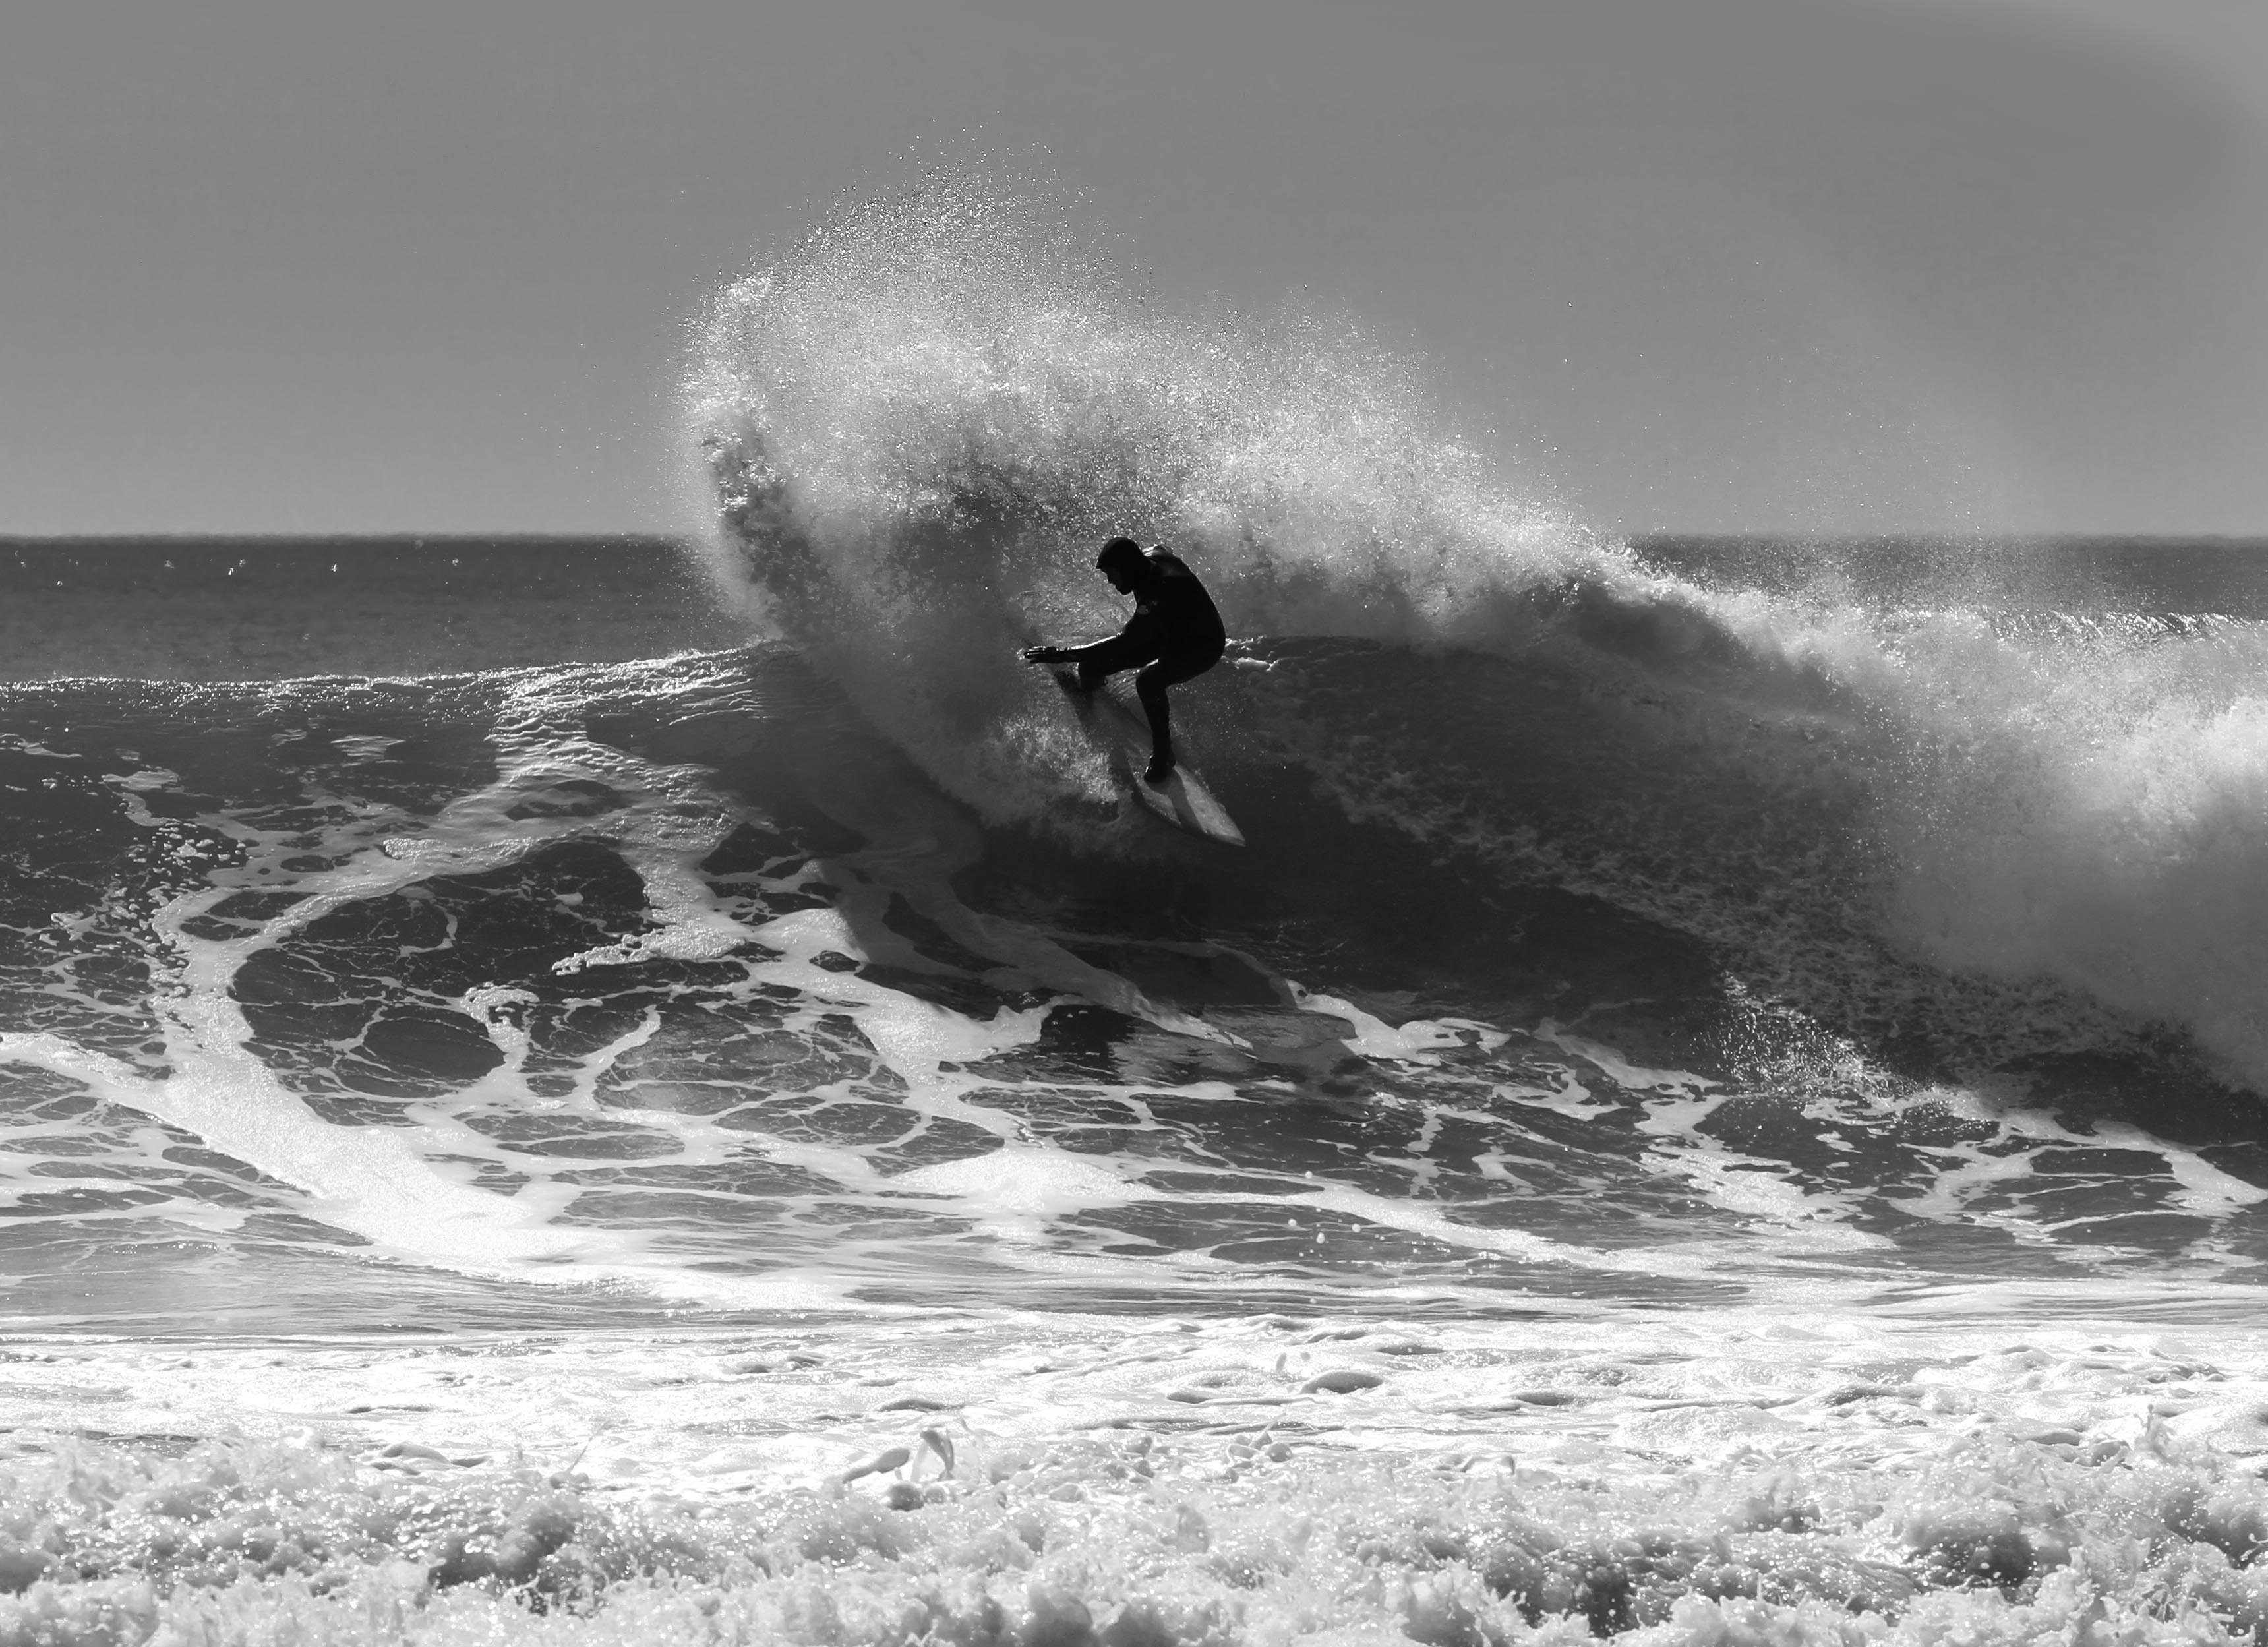 Grant Monahan, auditioning for a slasher film. Think he got the part. Photo: Andrew Blauschild.